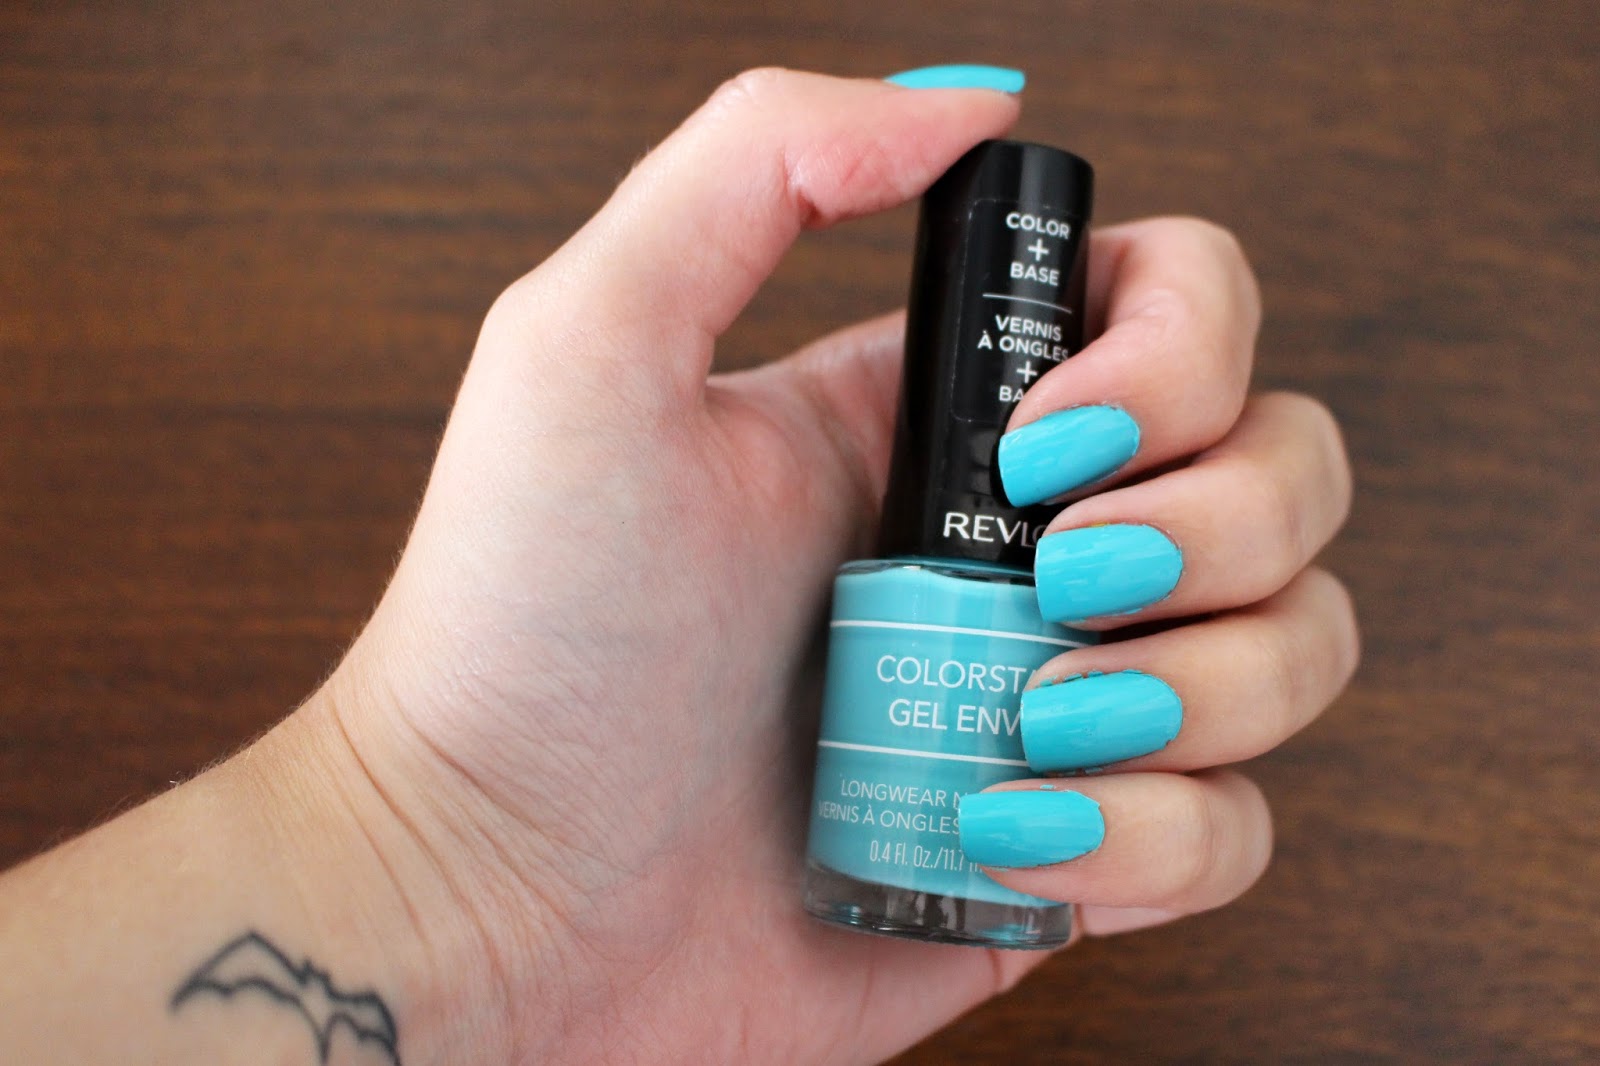 6. Revlon ColorStay Gel Envy in "Barely There" - wide 9